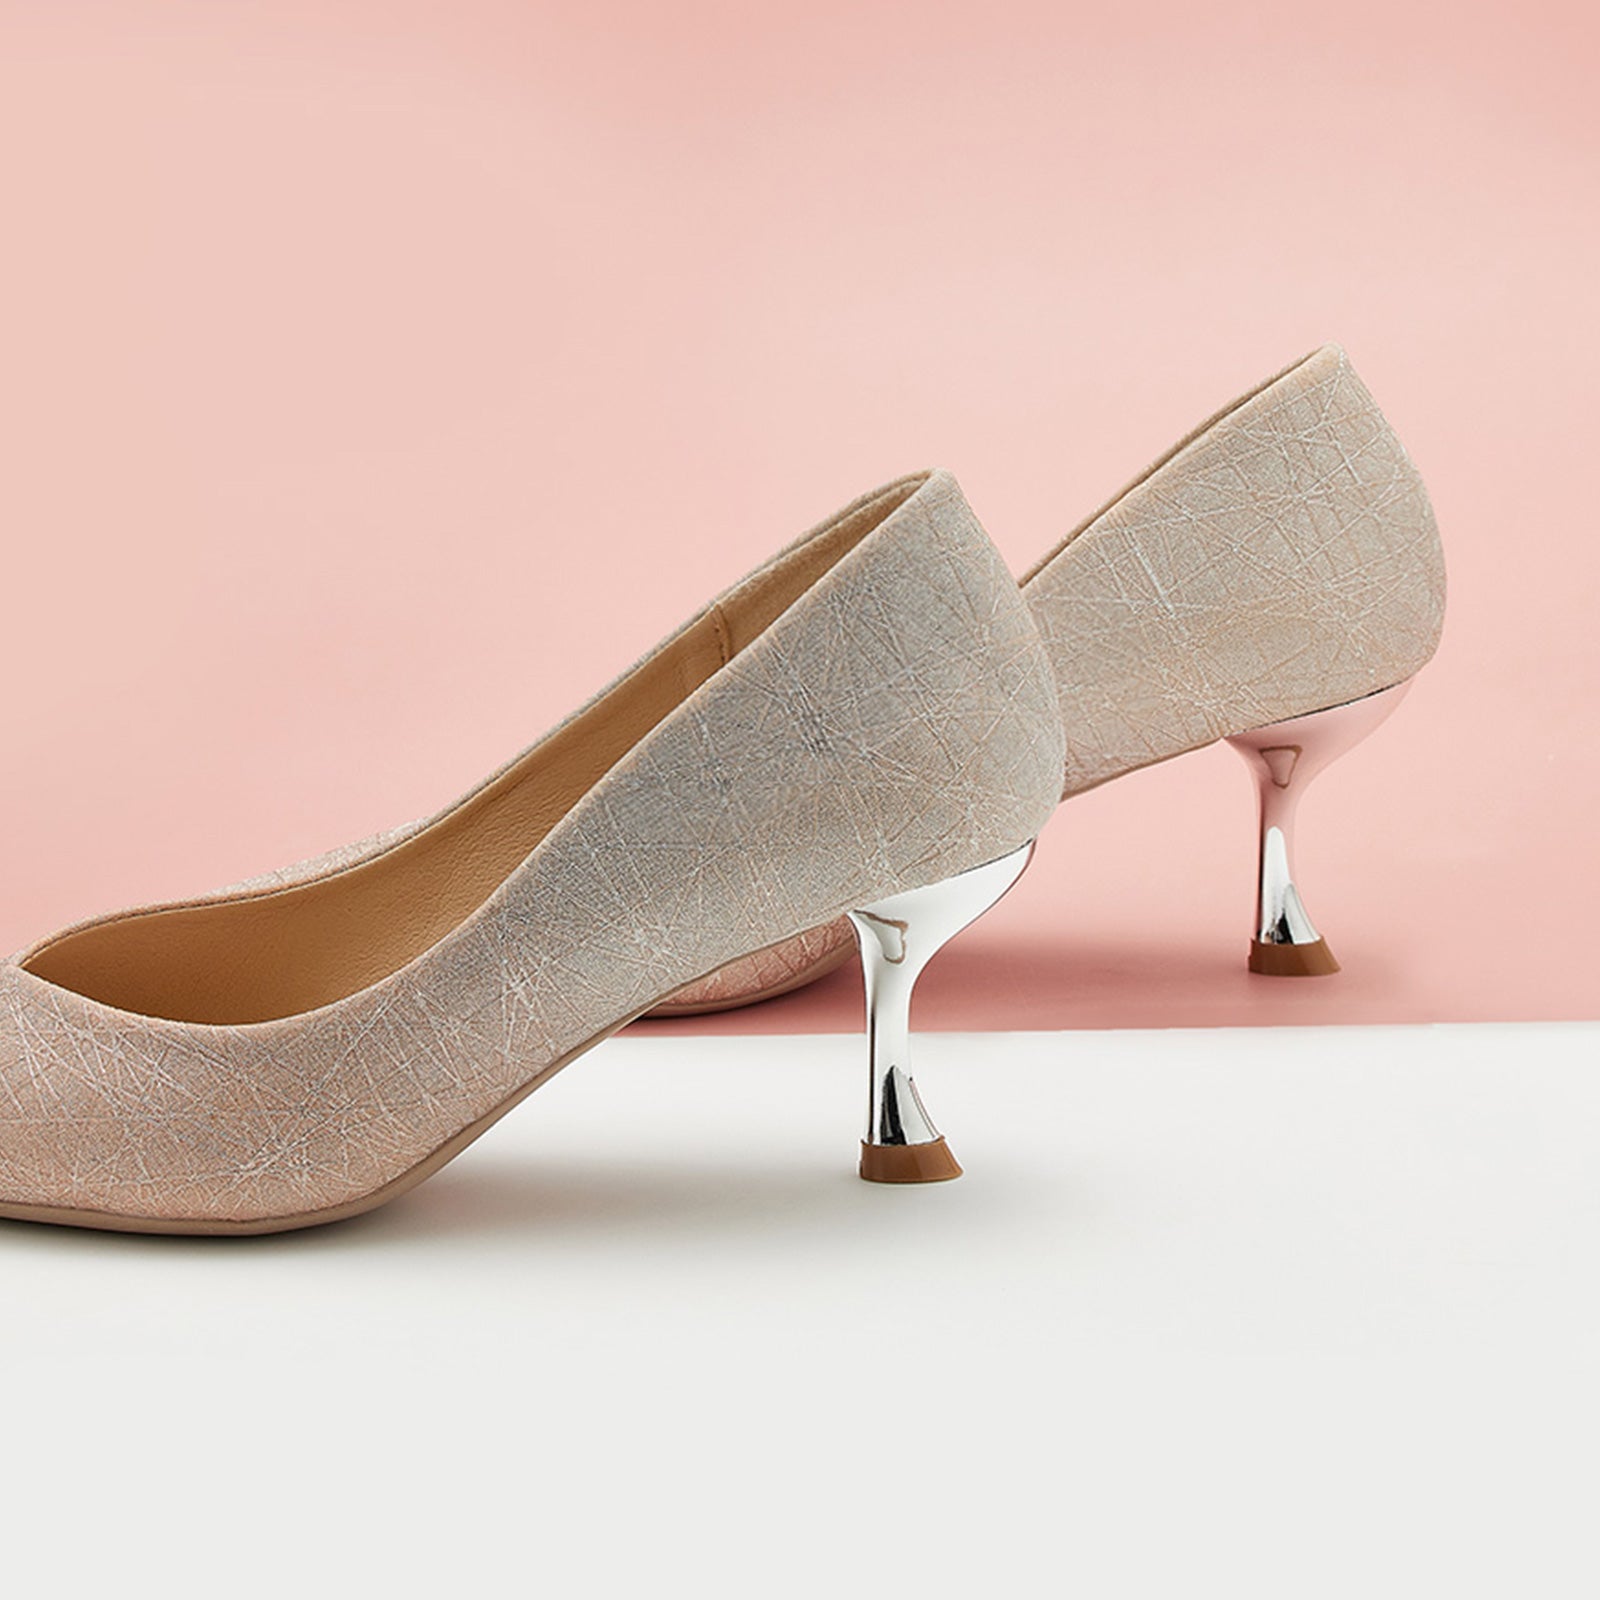 Romantic Radiance: Glittered Pink Louis Heel Shoes, combining romance and sparkle for a stunning and fashionable look.